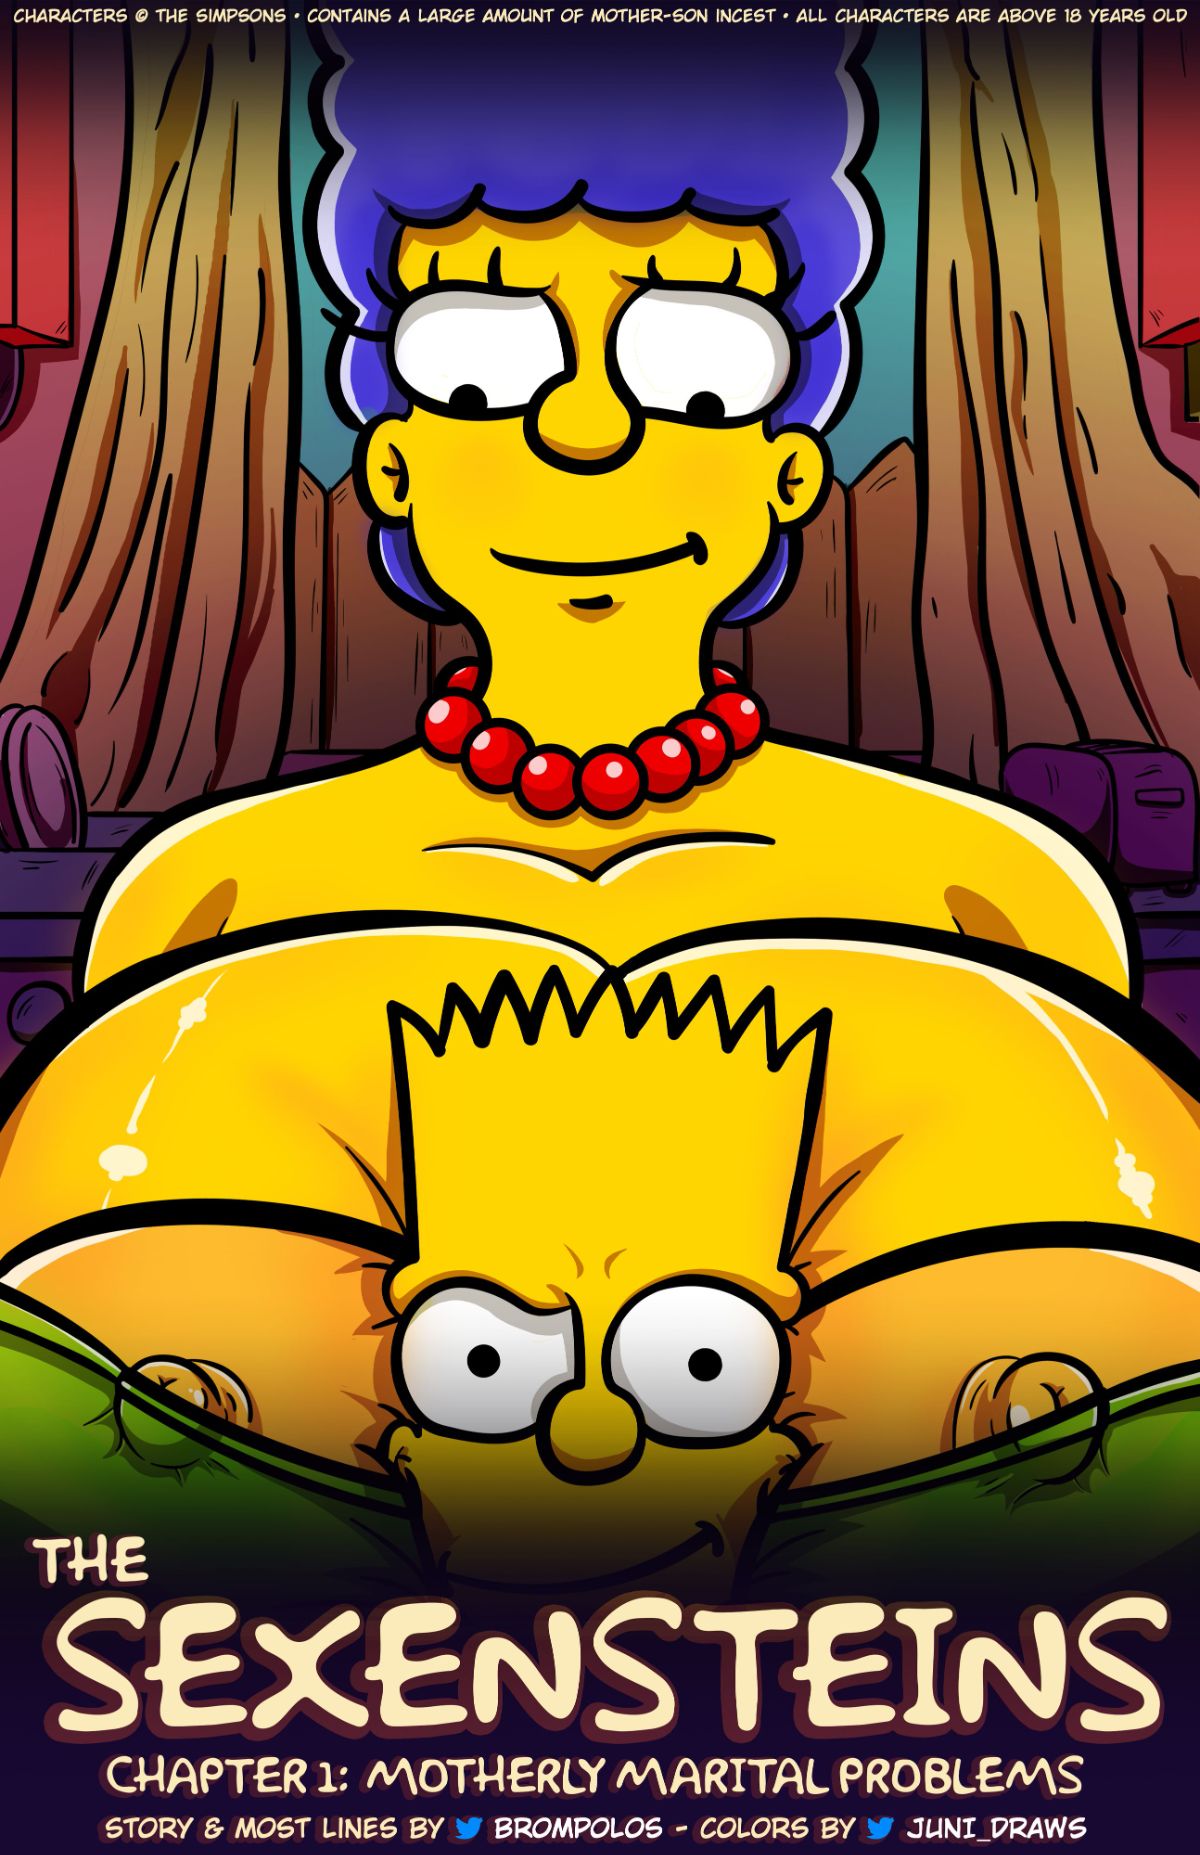 Hq Porn 18 Year Girls Sex - The Sexensteins (The Simpsons) [Brompolos] - PortuguÃªs - The Hentai